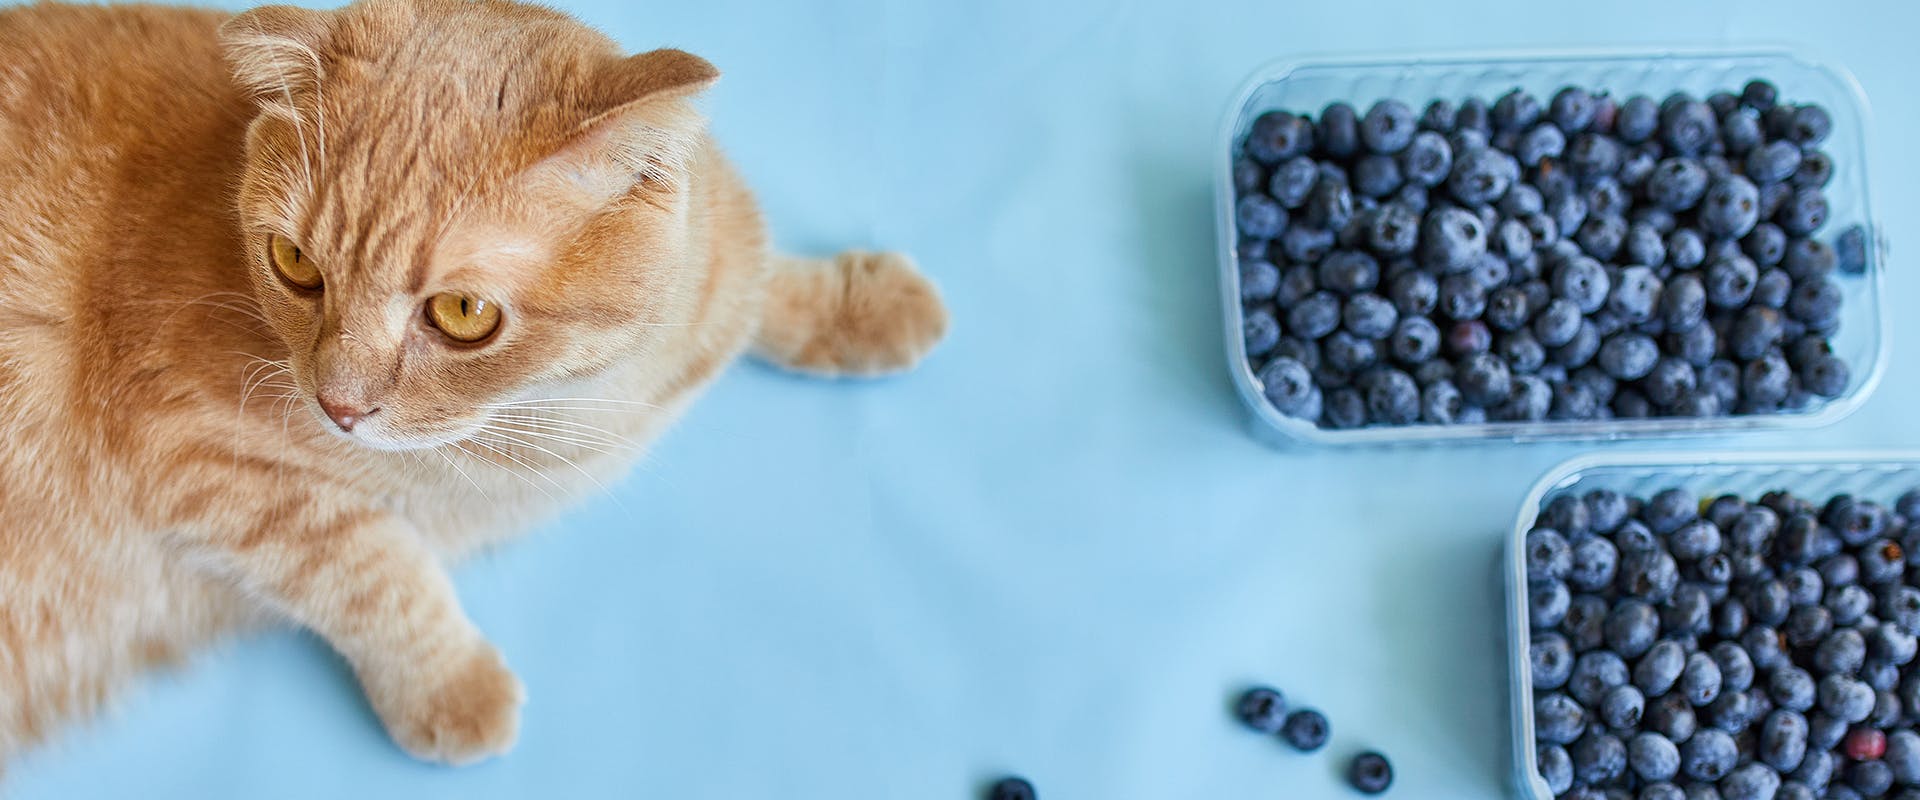 Ginger cat sitting next to two punnets of fresh blueberries